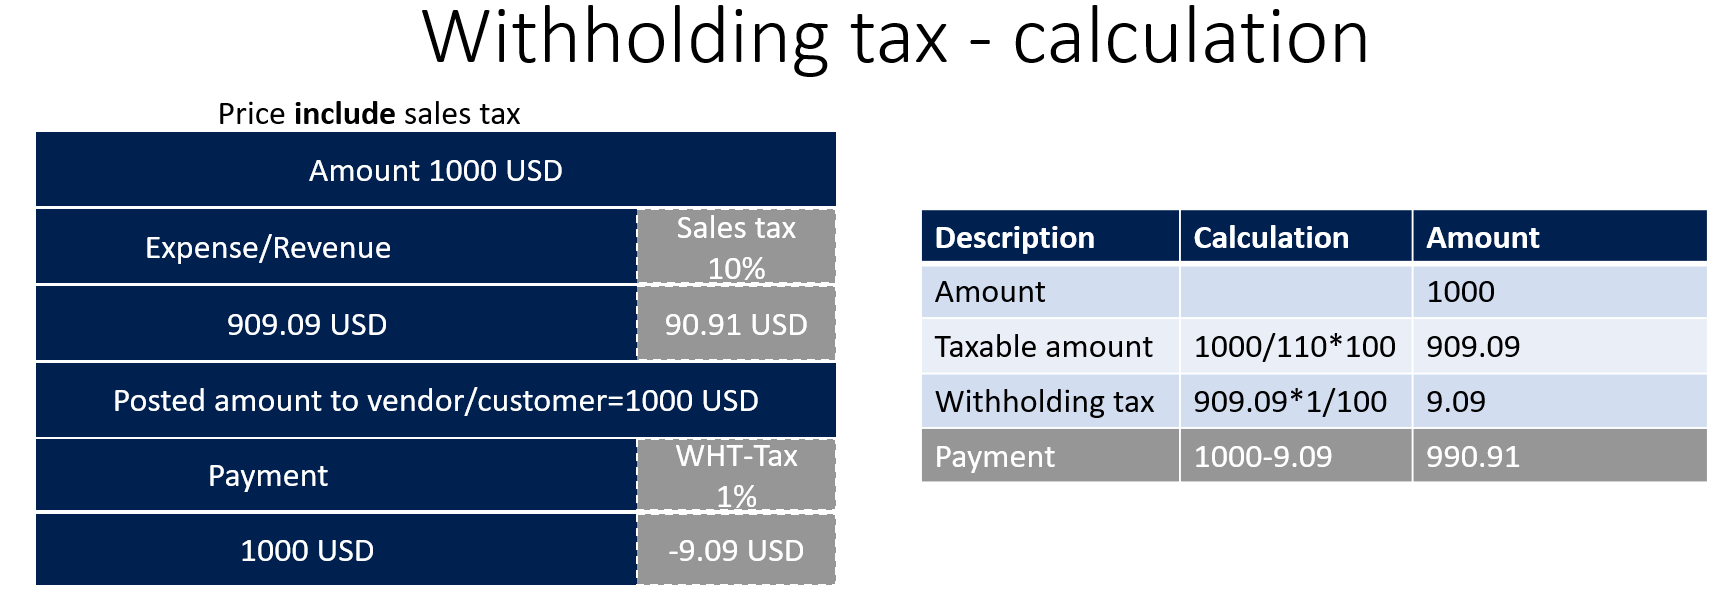 withholding tax presentation in financial statements